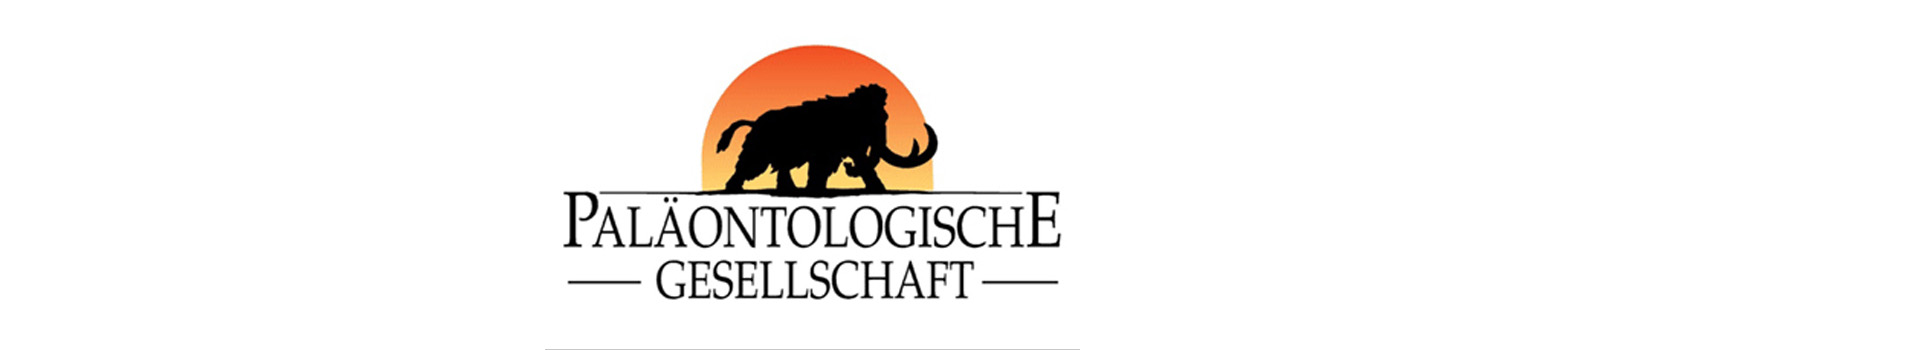 Annual Meeting of the Palaeontological Association